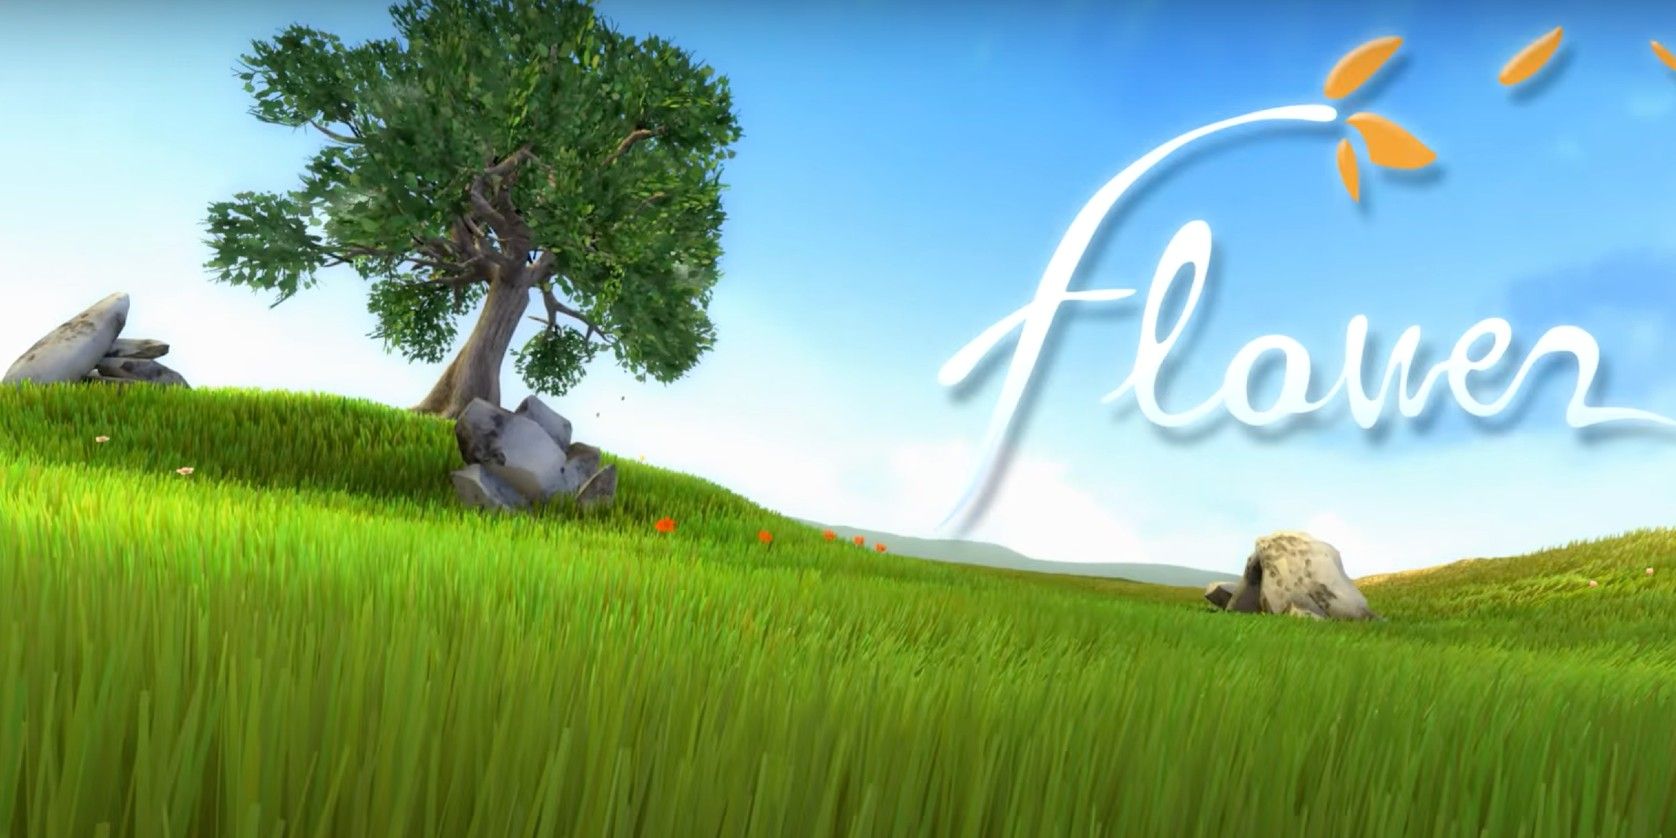 A screenshot of the title screen showing the game's title superimposed on a grassy field with a tree in the game, Flower.